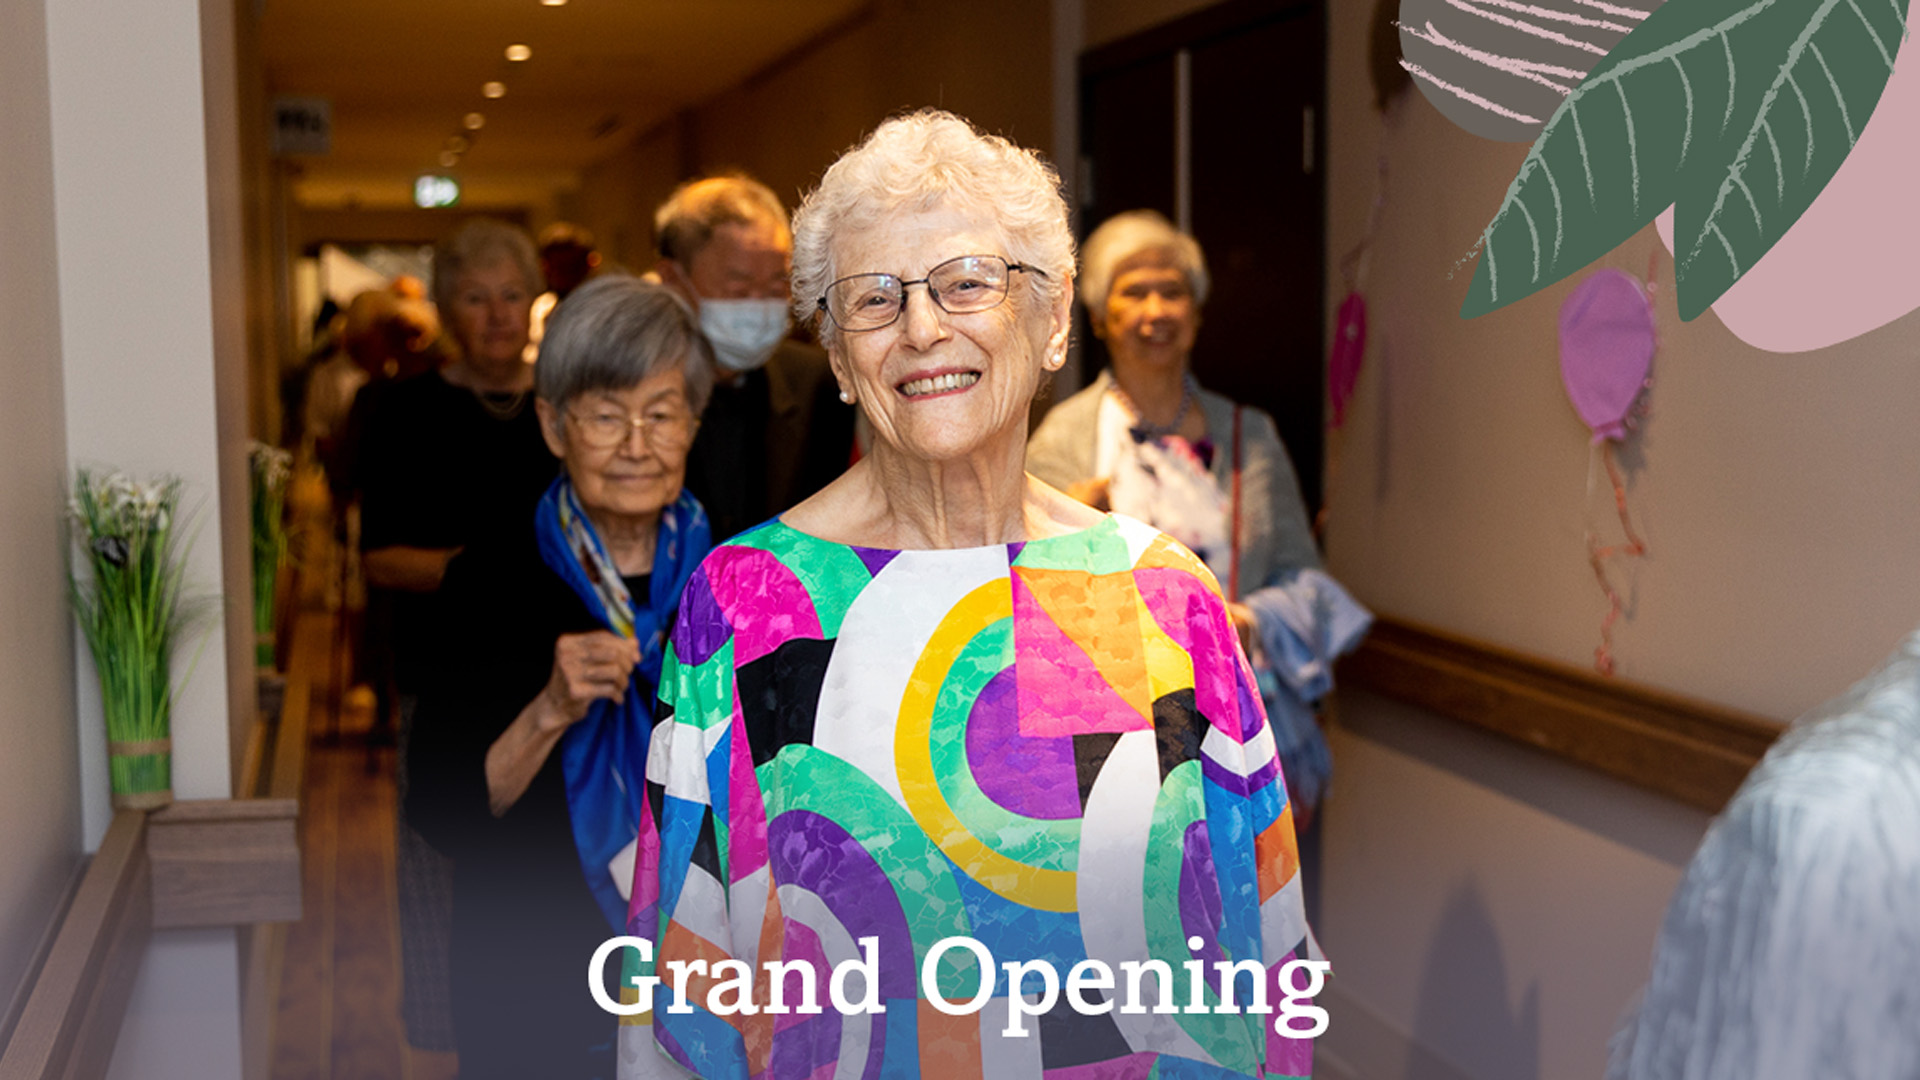 Grand opening ceremony of Wisteria place retirement home